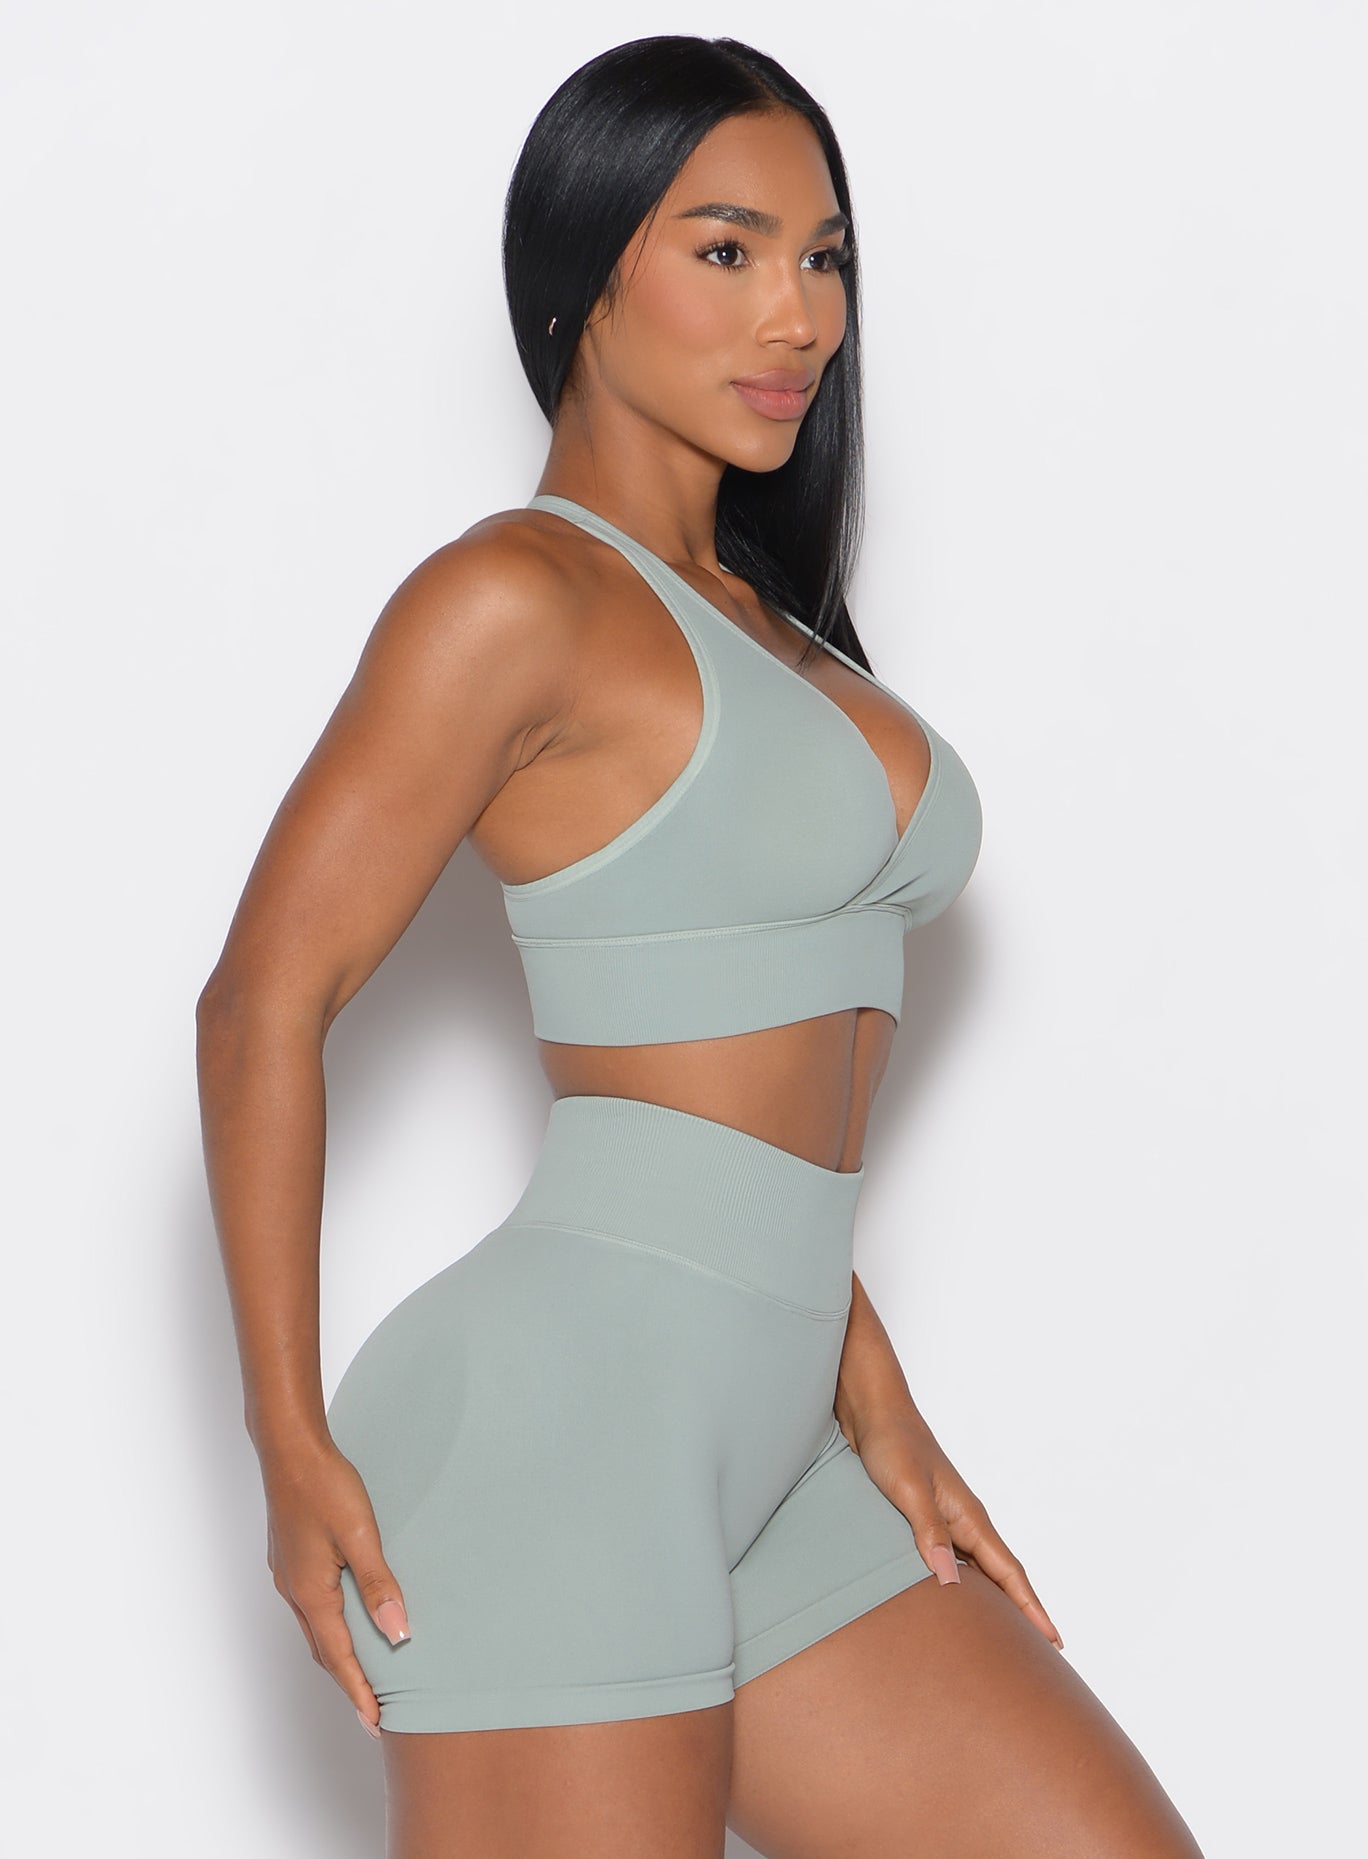 right side profile picture of a model facing forward wearing our cross over bra in light taupe color along with the matching shorts